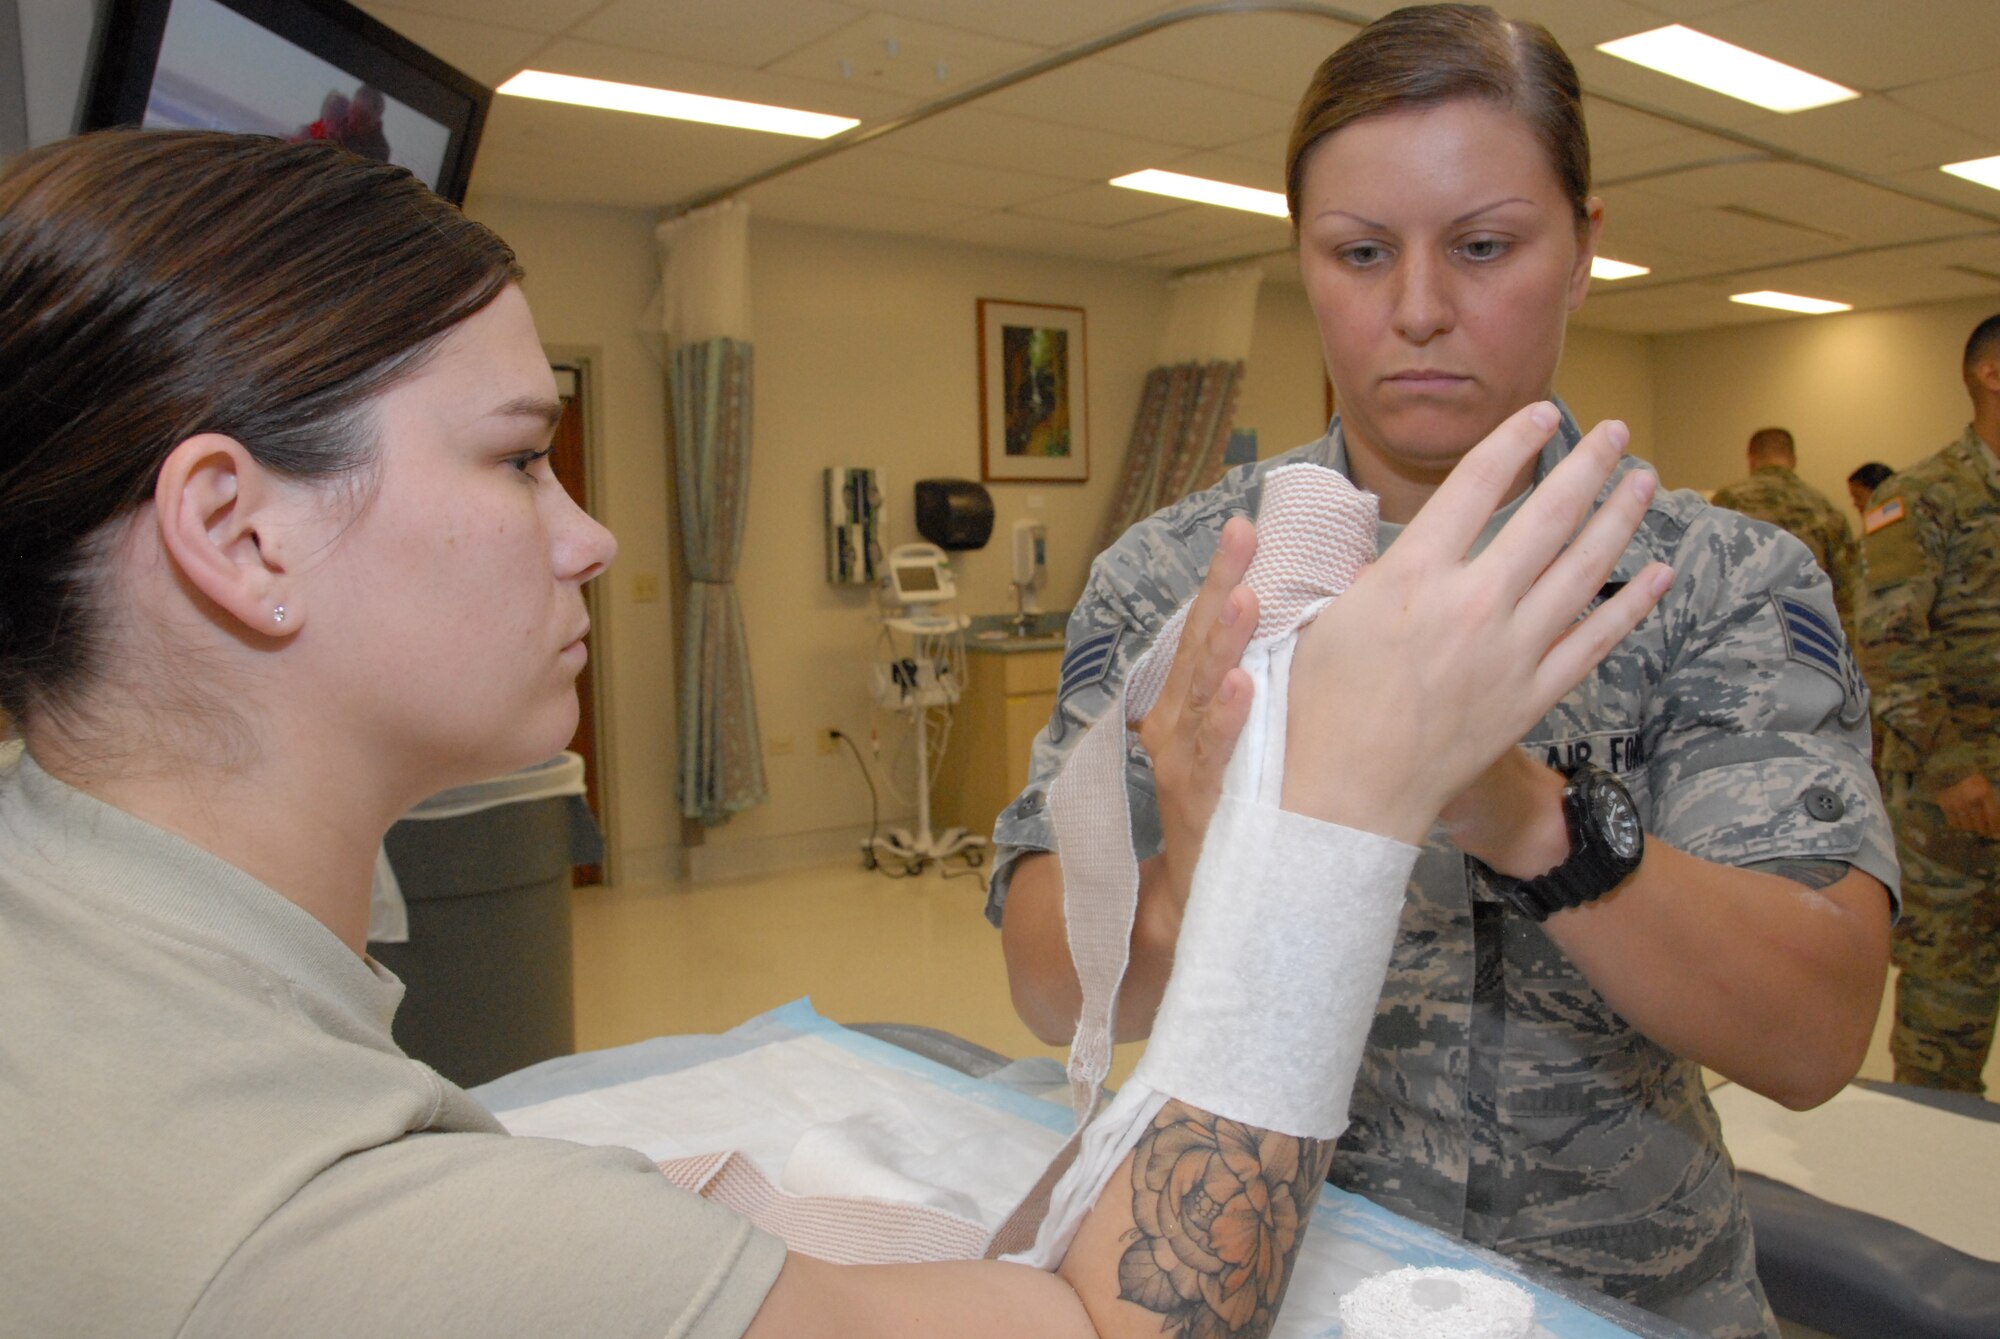 Oregon Air National Guard Senior Airman Margo Testa (right) practices applying a splint on her fellow medic, Senior Airman Taryn Lommasson, during annual training at Tripler Army Medical Center, in Honolulu, Hawaii, Aug. 28, 2018. Testa and Lommasson were part of a team from the 142nd Medical Group which took part in Medical Facilities Annual Training, Aug. 18-31, 2018, Medics from the unit were able to assist in a real-world support mission when Hurricane Lane threatened to strike the Hawaiian Islands the week of Aug. 20, 2018. (U.S. Air National Guard Photo by Master Sgt. Nick Choy)